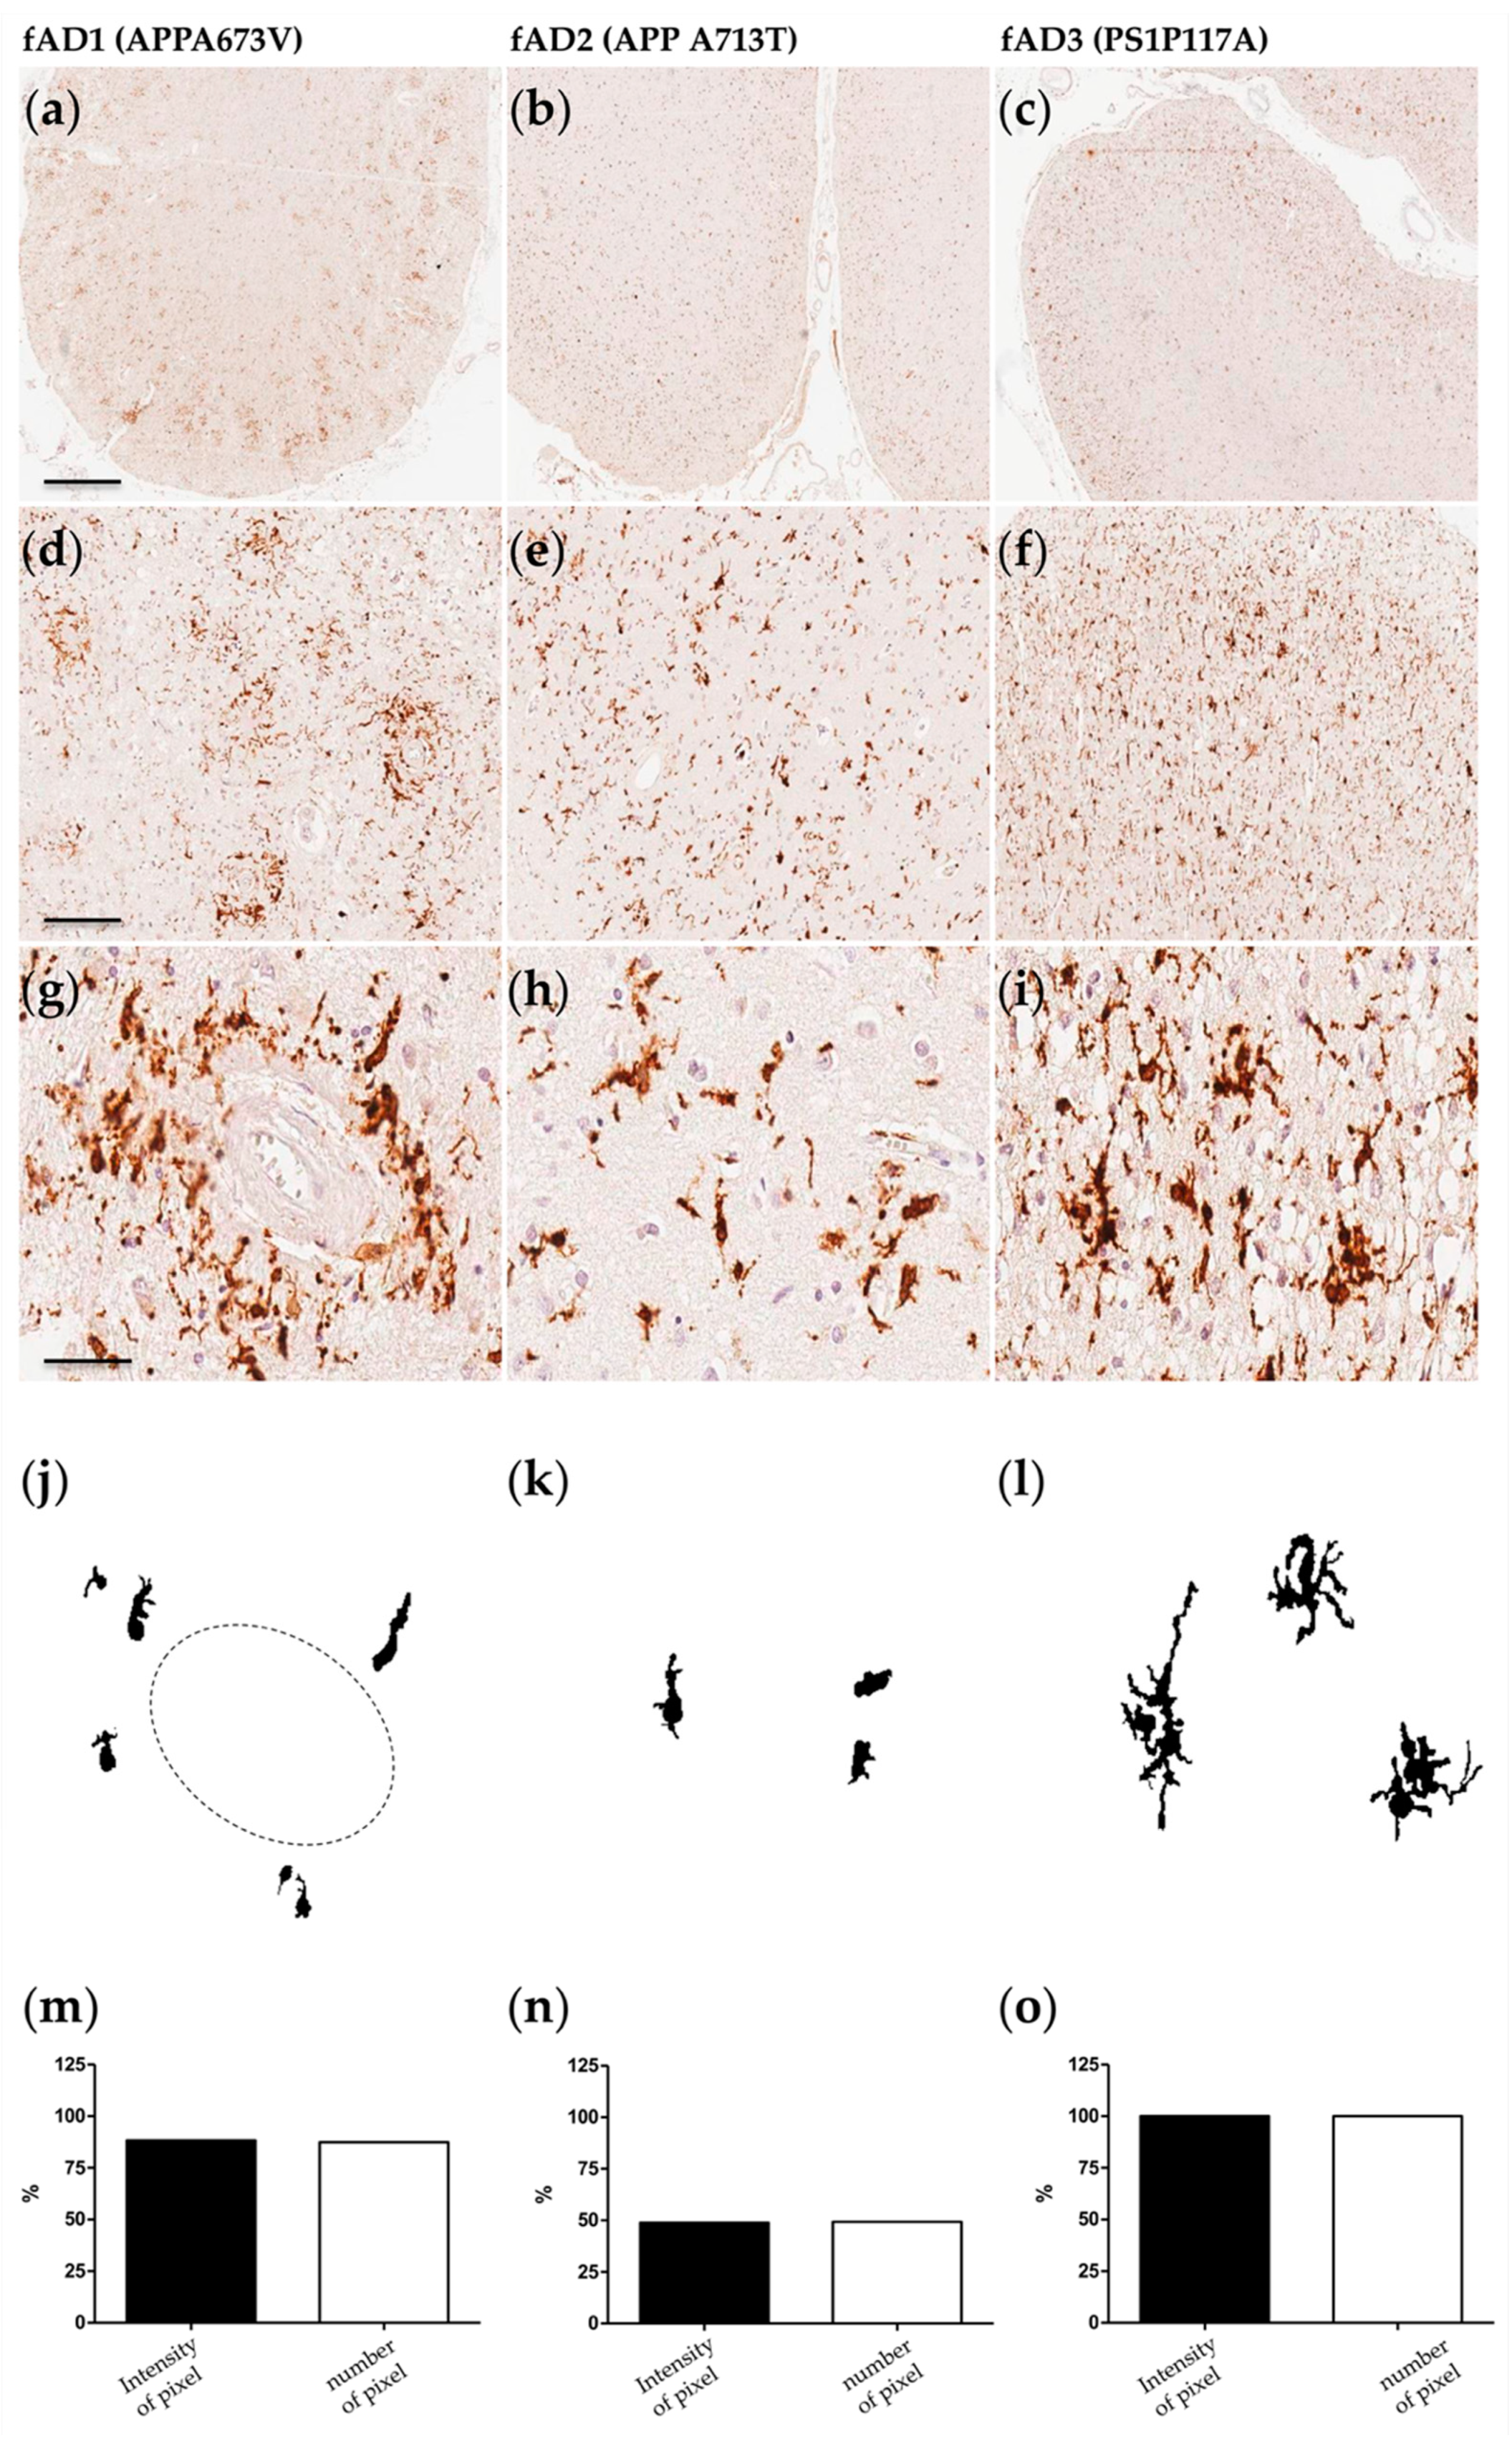 Ijms Free Full Text Microglial Heterogeneity And Its Potential Role In Driving Phenotypic Diversity Of Alzheimer S Disease Html